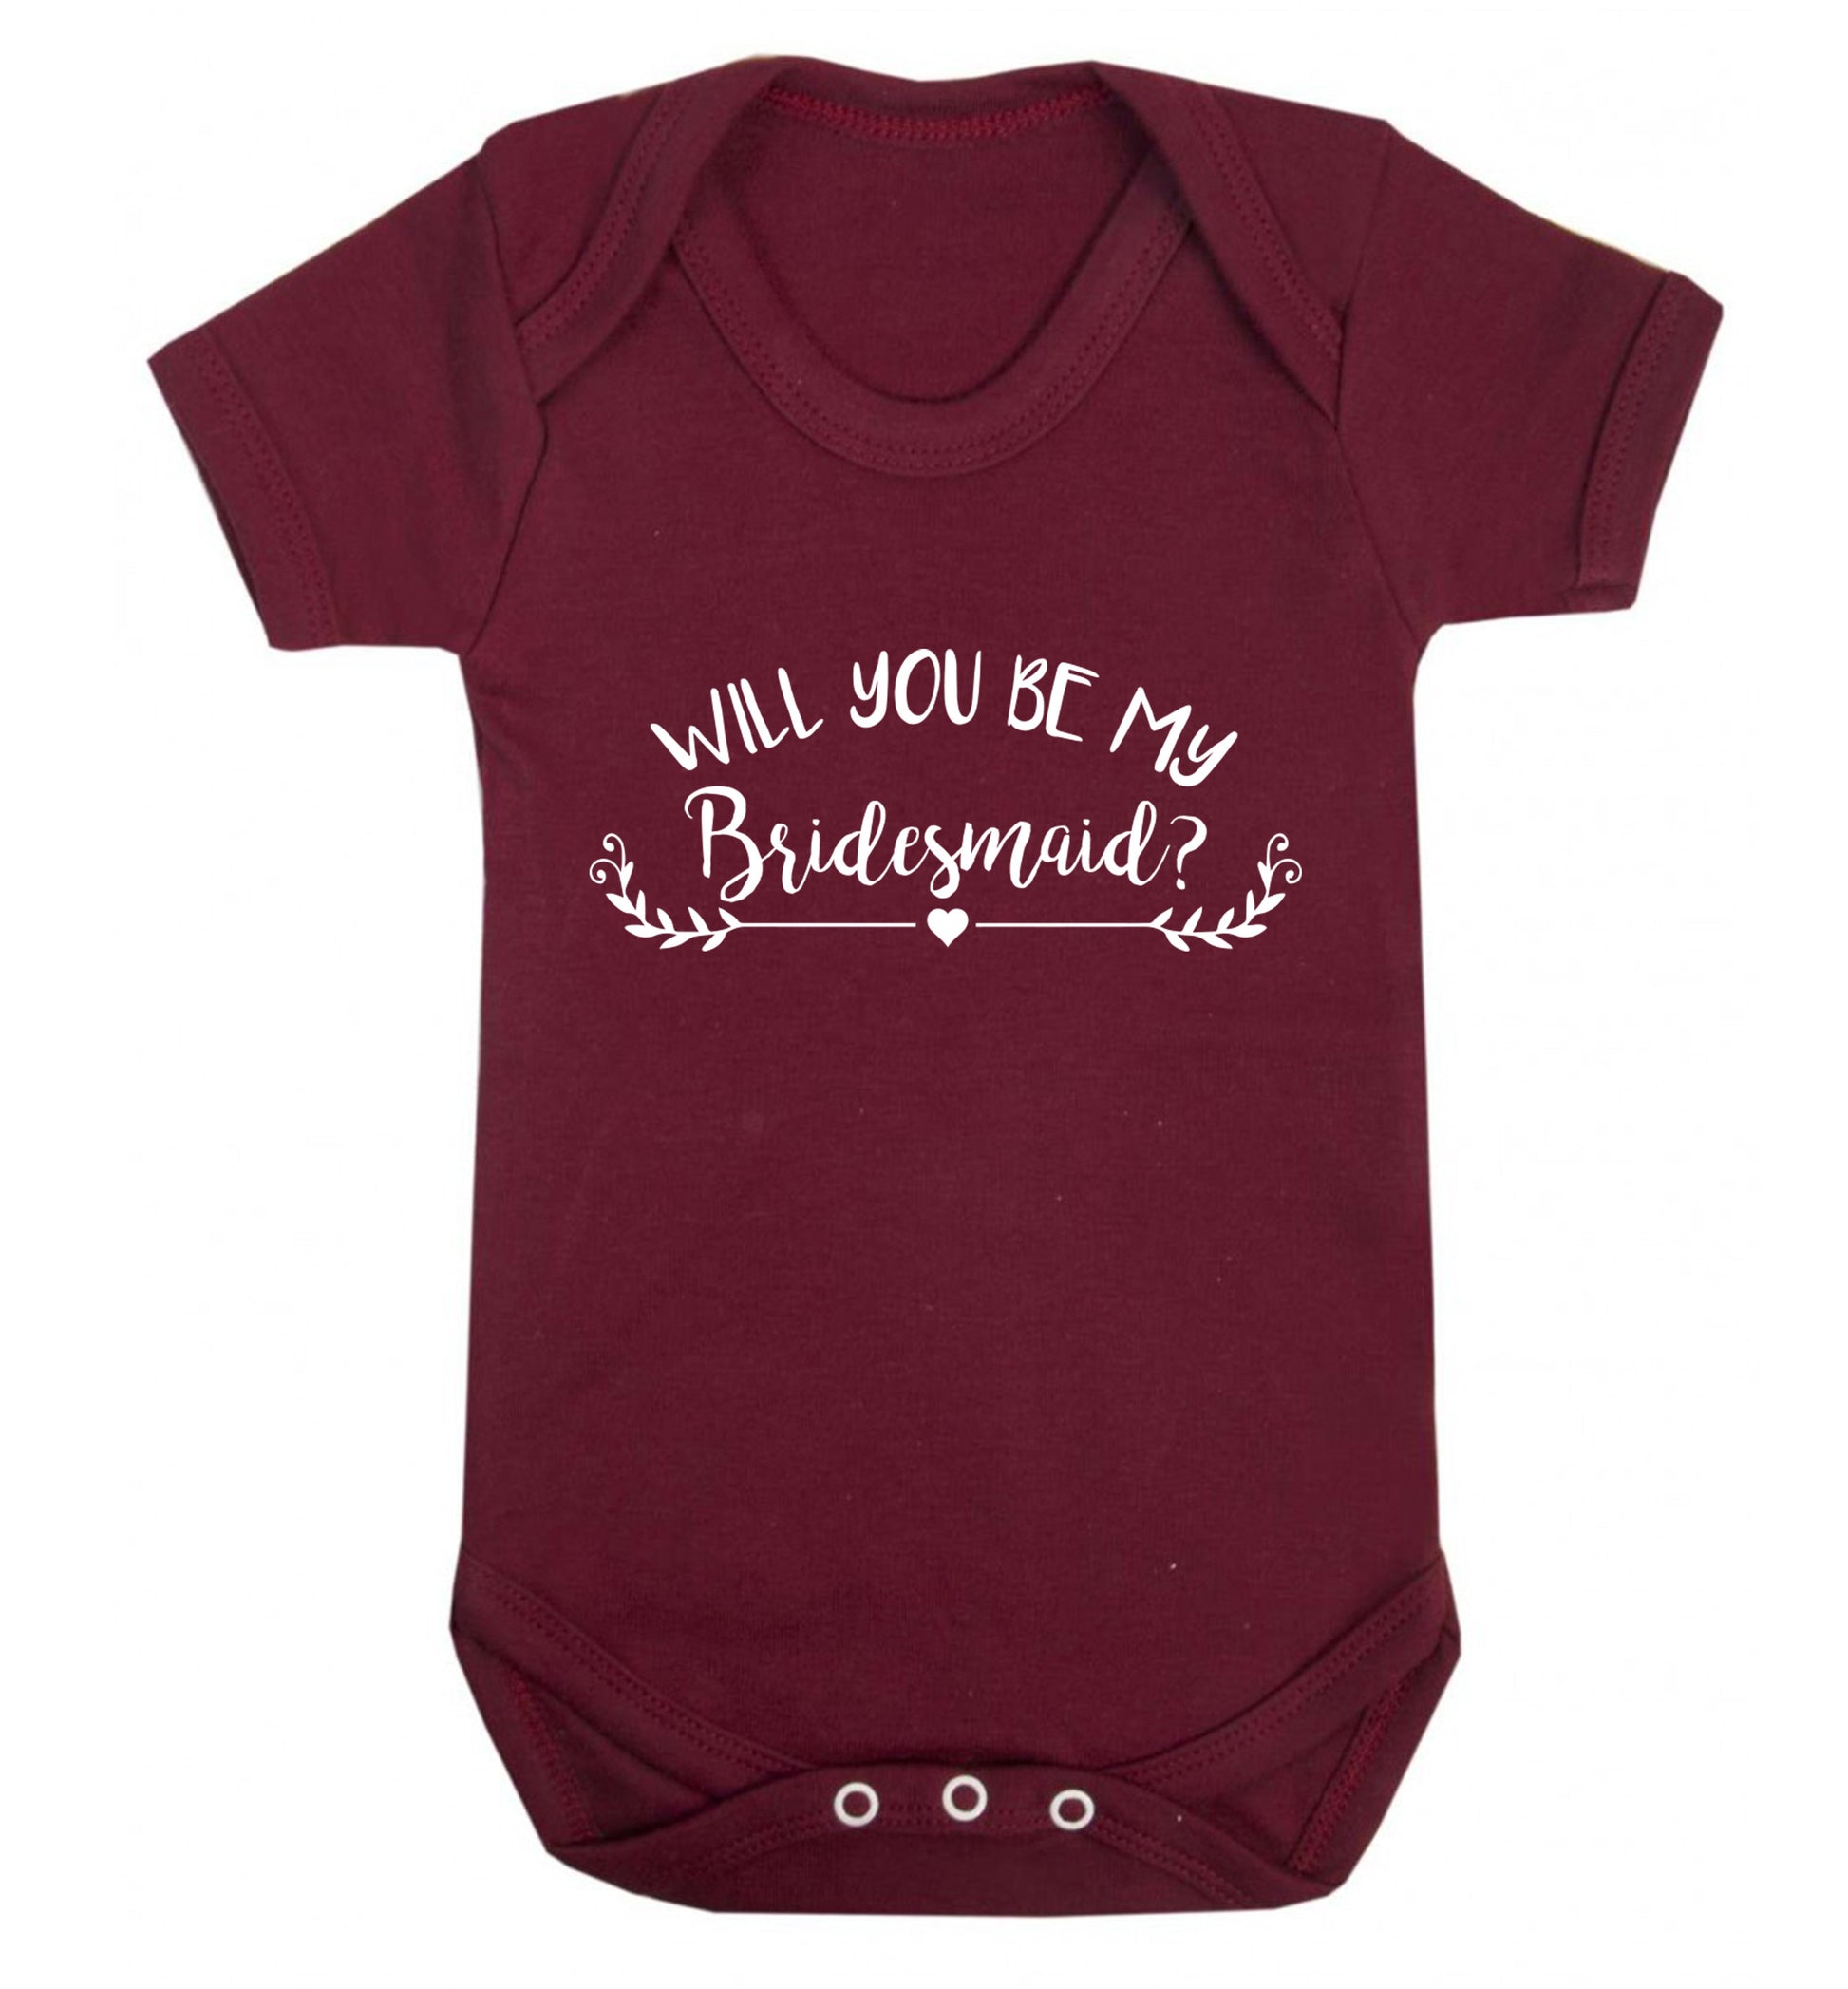 Will you be my bridesmaid? Baby Vest maroon 18-24 months